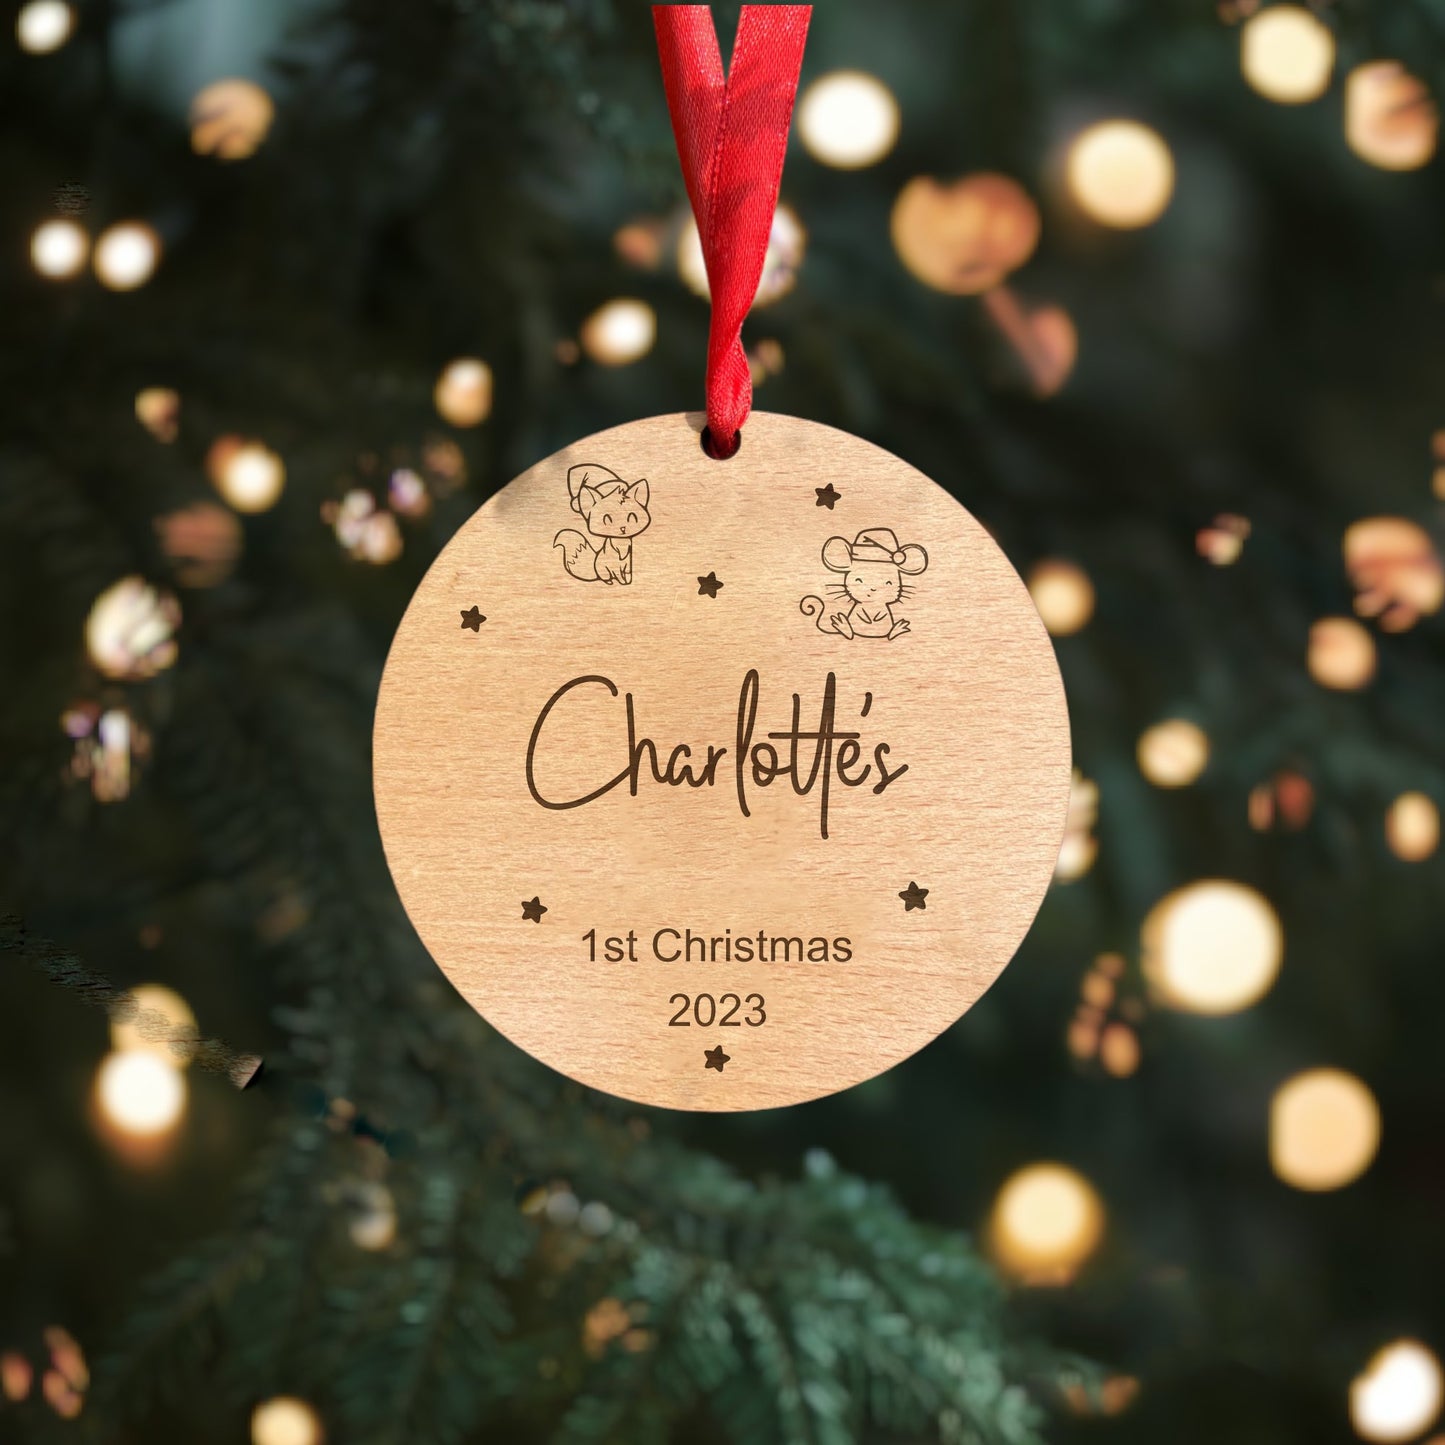 Create lasting memories with our one-of-a-kind Premium Beech Veneer Baby's First Christmas Bauble. This heartwarming ornament boasts a delightful Fox and Mouse Design that adds a touch of whimsy to your tree. Customised with your baby's name and '1st Christmas 2023,' it's the perfect Unique Family Tradition and a meaningful keepsake for many Christmases to come.